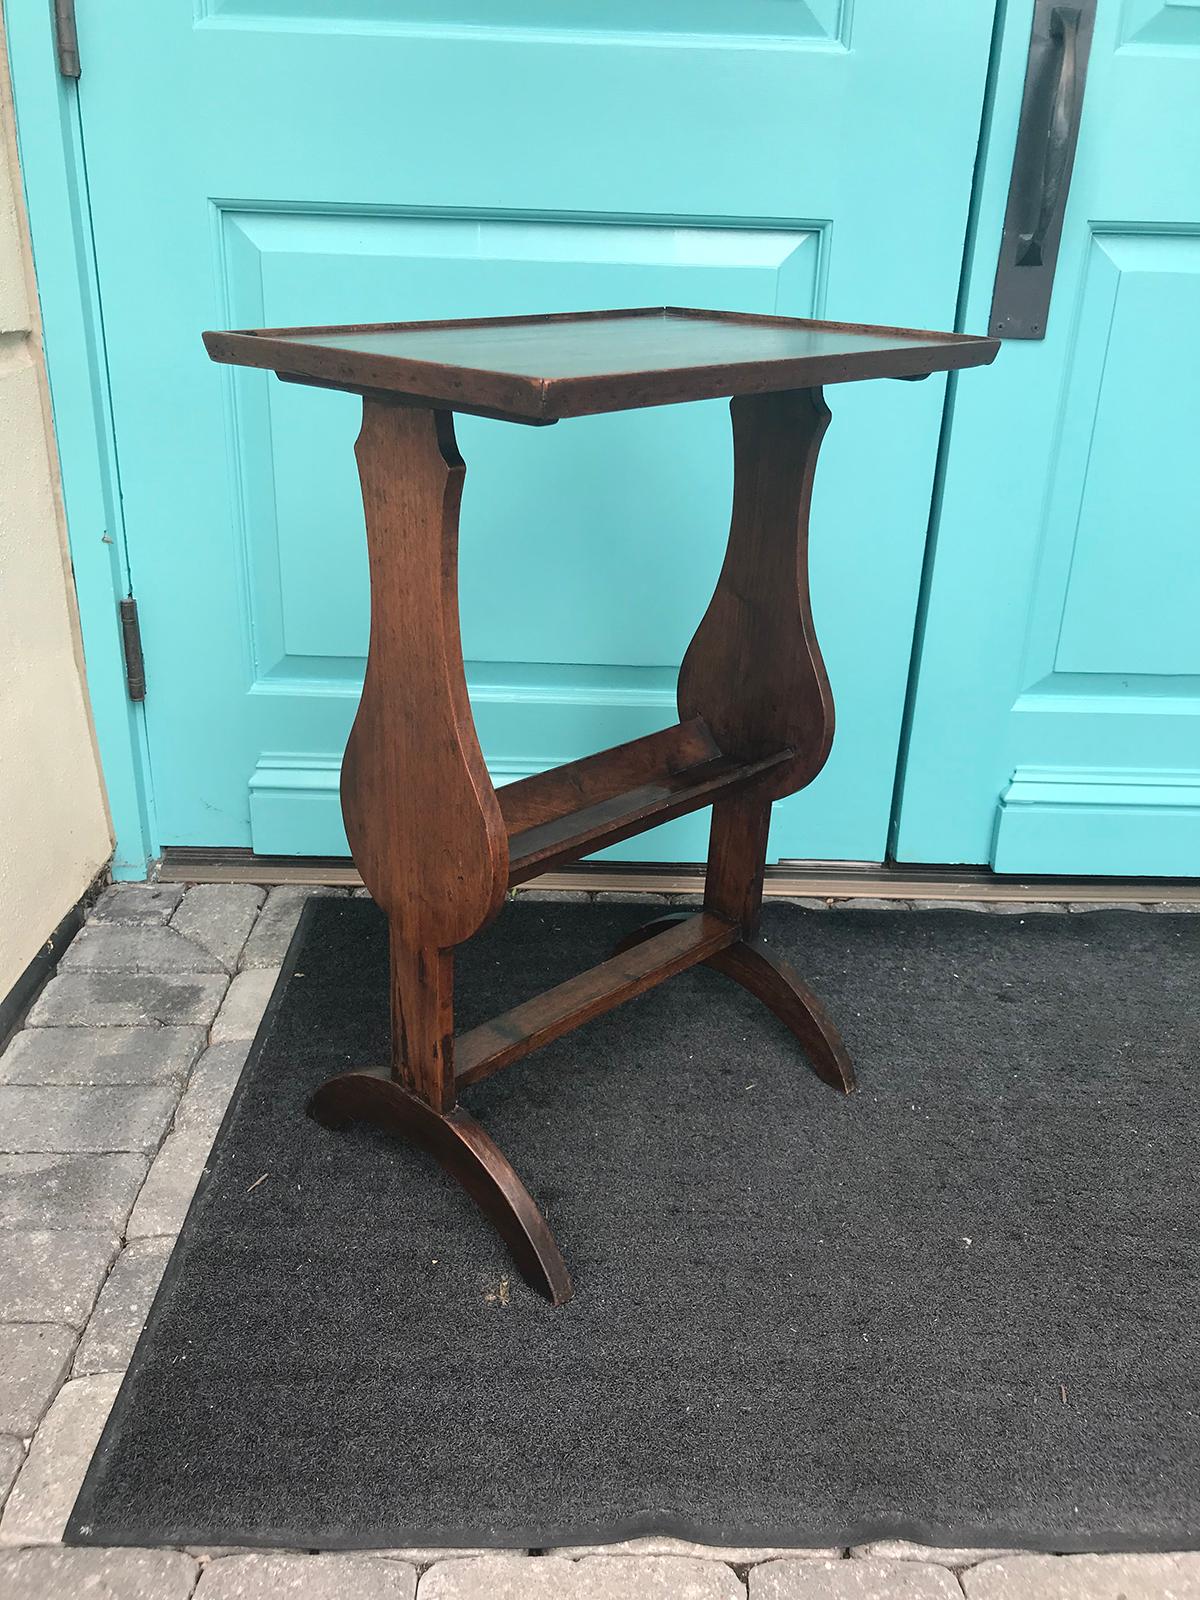 18th-19th century French fruitwood side table.